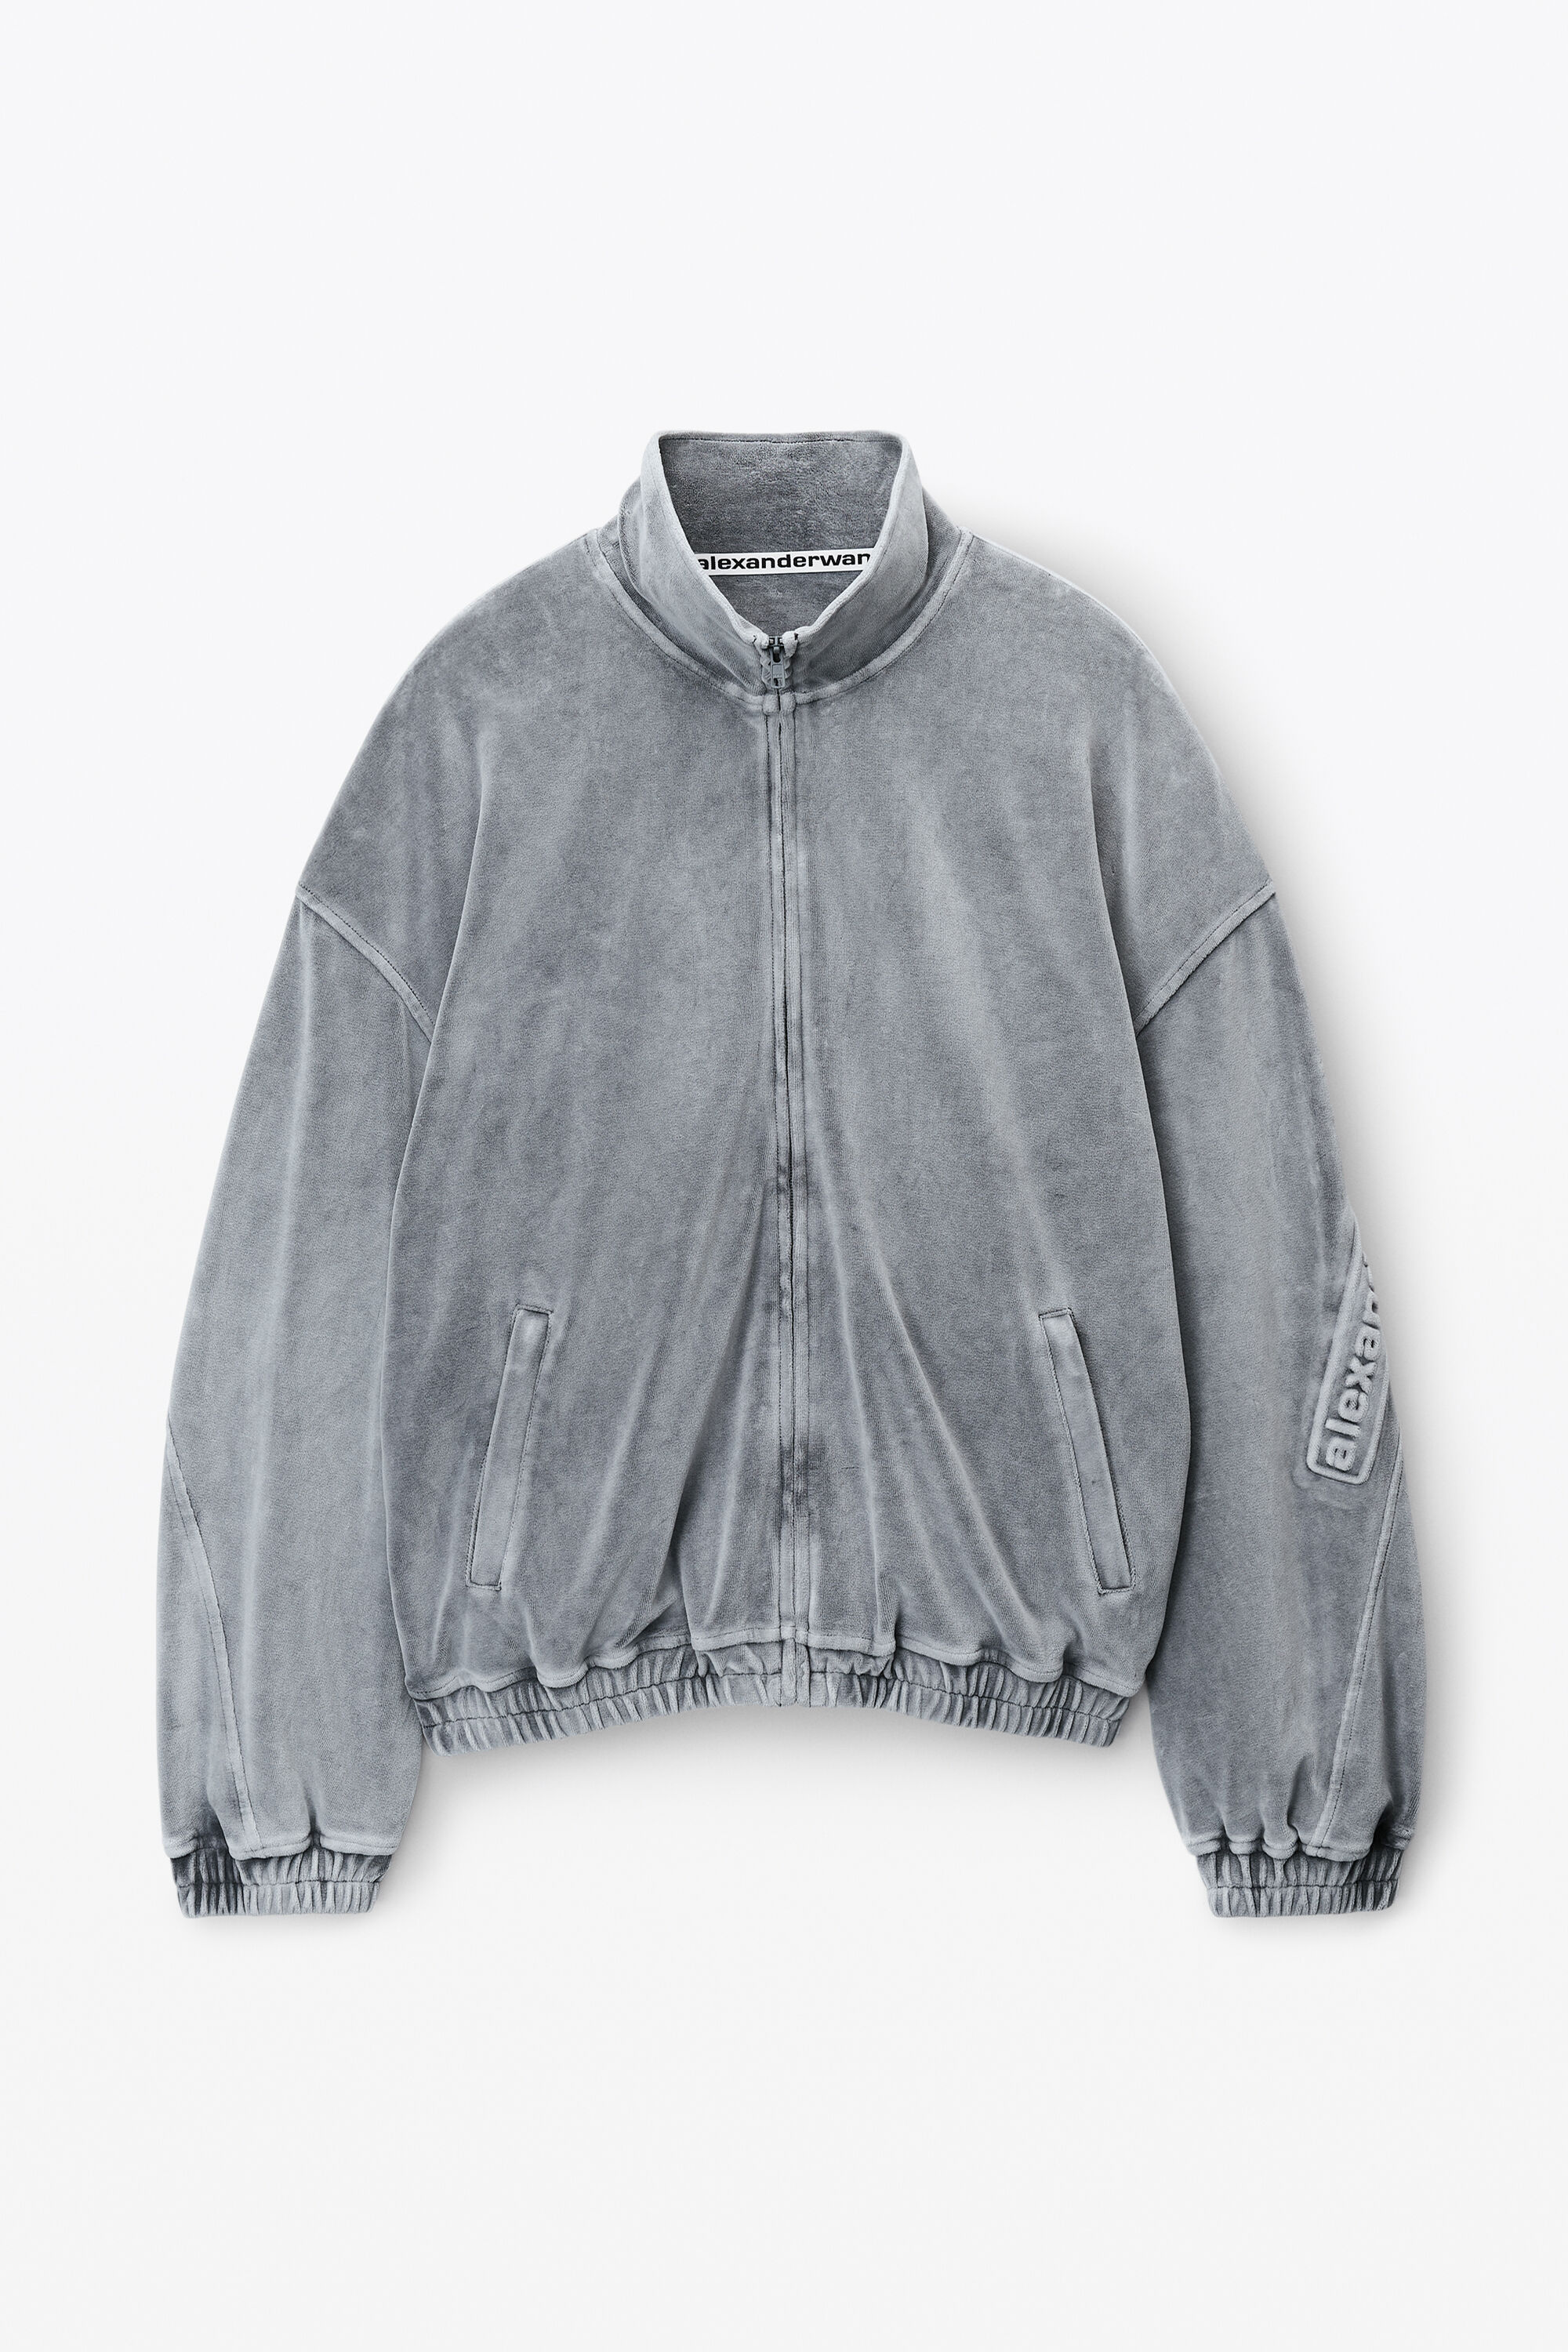 alexanderwang logo track jacket in velour WASHED CHARCOAL